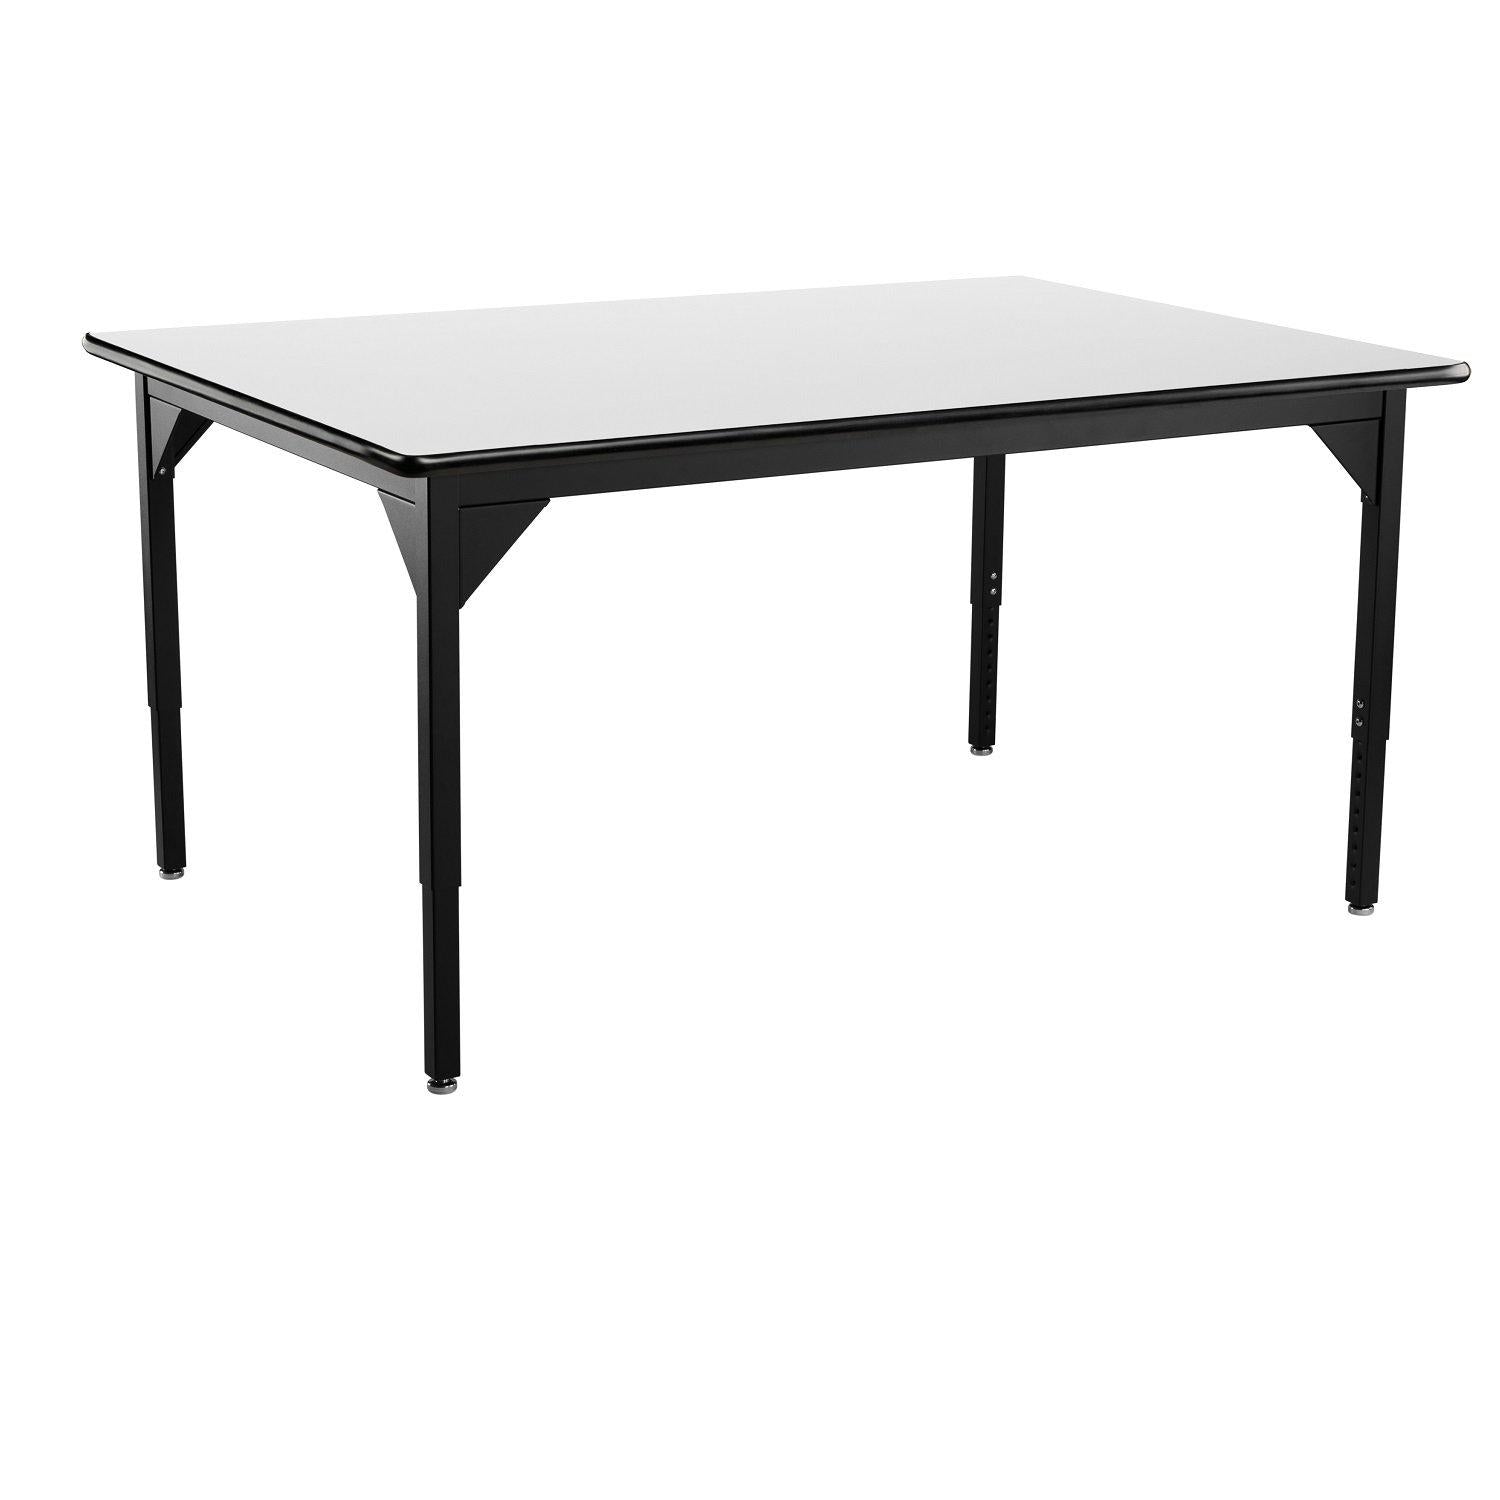 Heavy-Duty Height-Adjustable Utility Table, Black Frame, 42" x 42", Whiteboard High-Pressure Laminate Top